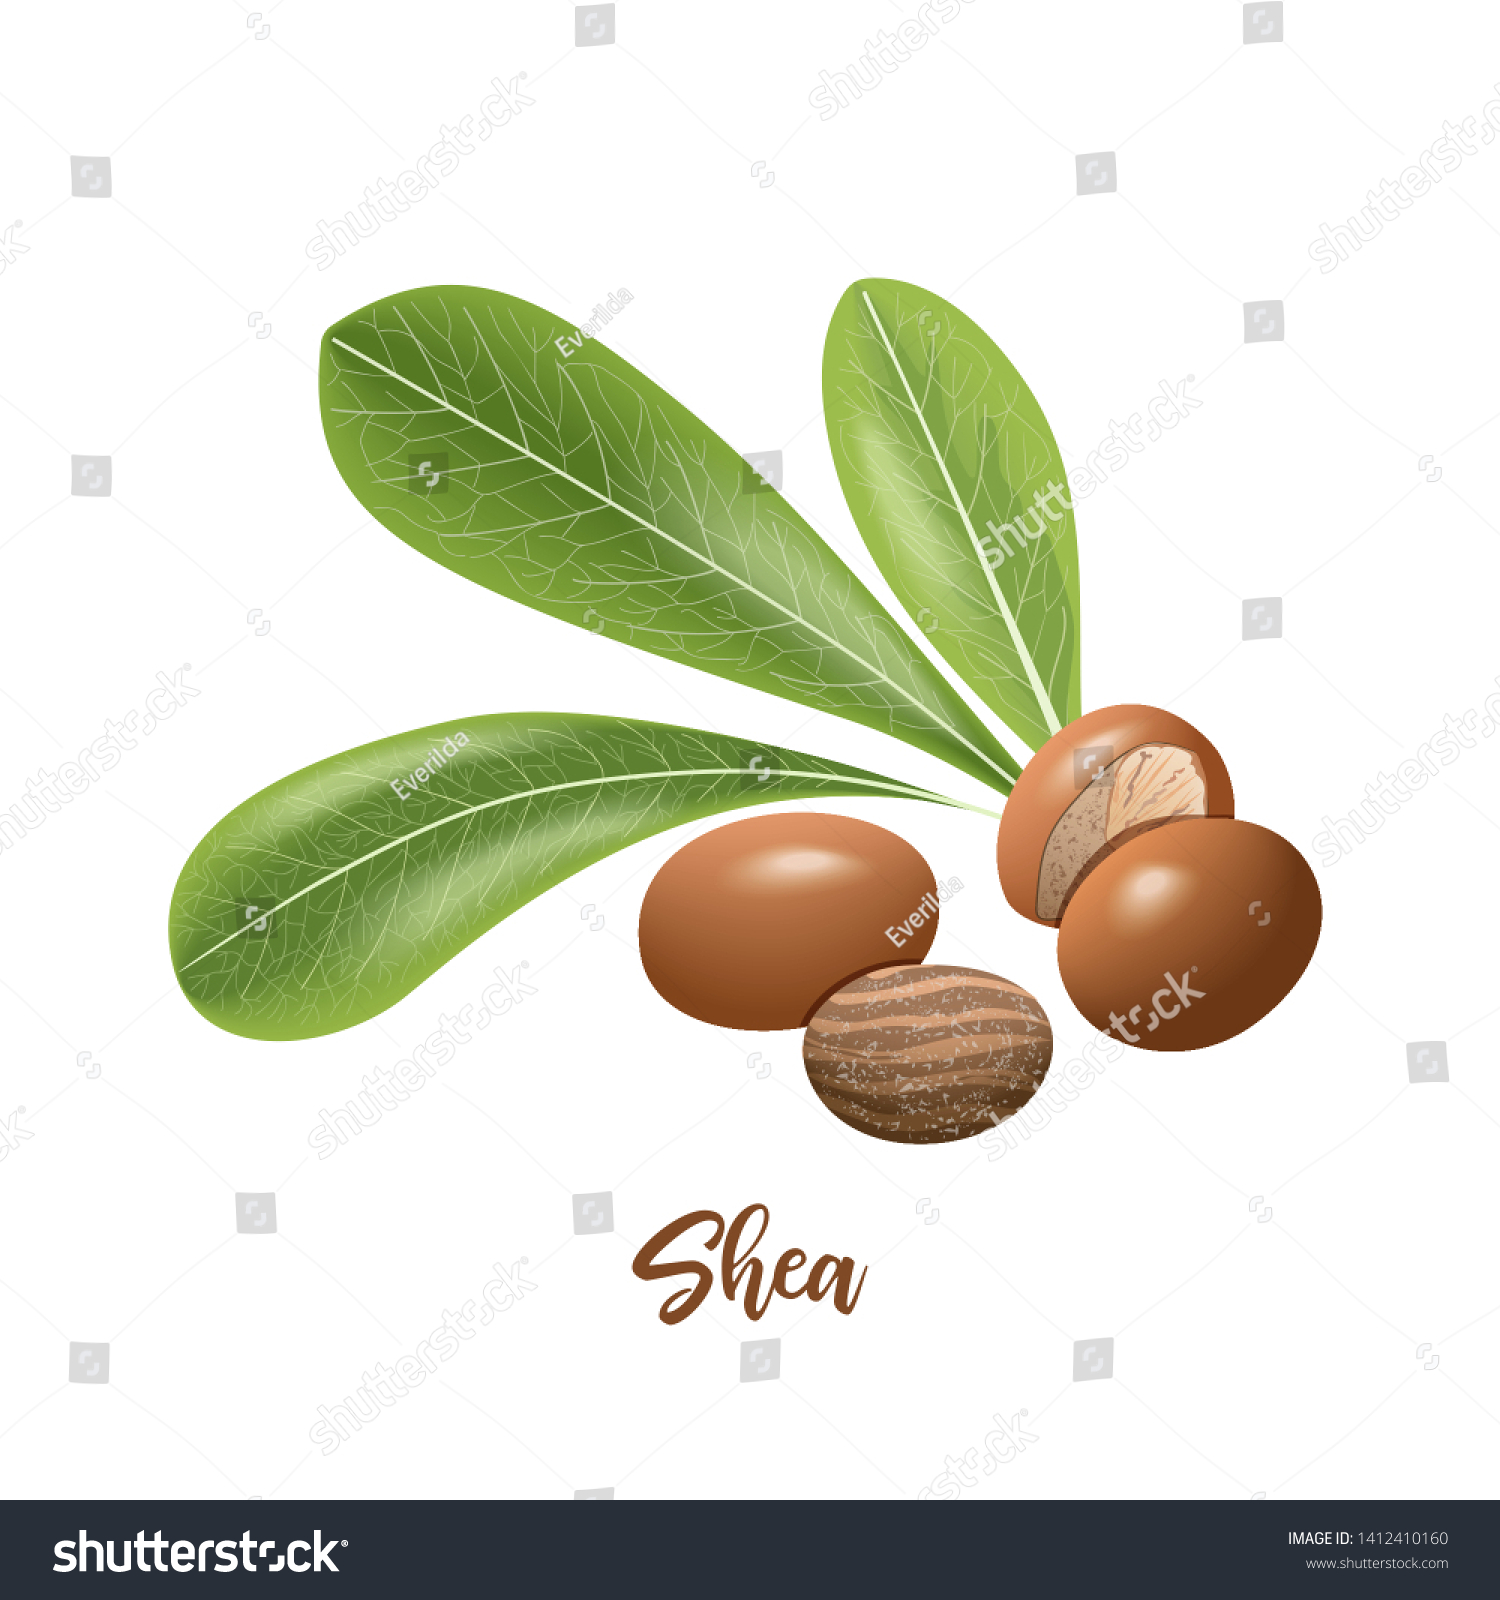 SVG of Shea nuts and leaves. shi tree pods whole and peeled. Vitellaria paradoxa. Card template copy space. Oilplant for cooking, cosmetics, aromatherapy, perfume, food, healthcare, ointments, oil prints svg